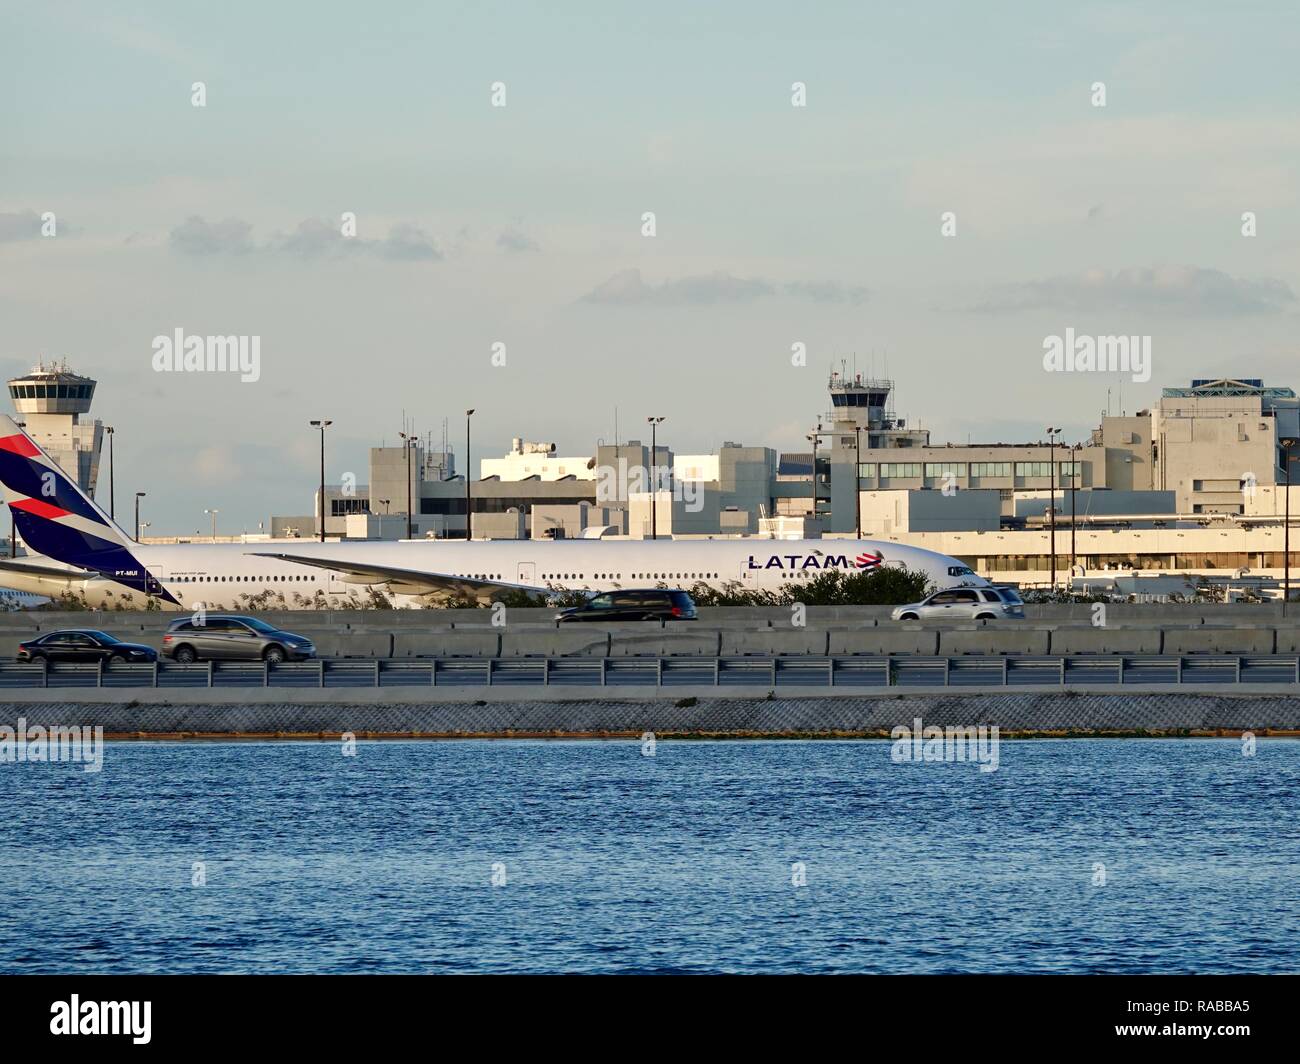 Latam PT-MUI, Boeing 777-300, an airline flying in/out of South America, taxiing on runway at Miami International Airport, Miami, Florida, USA. Stock Photo